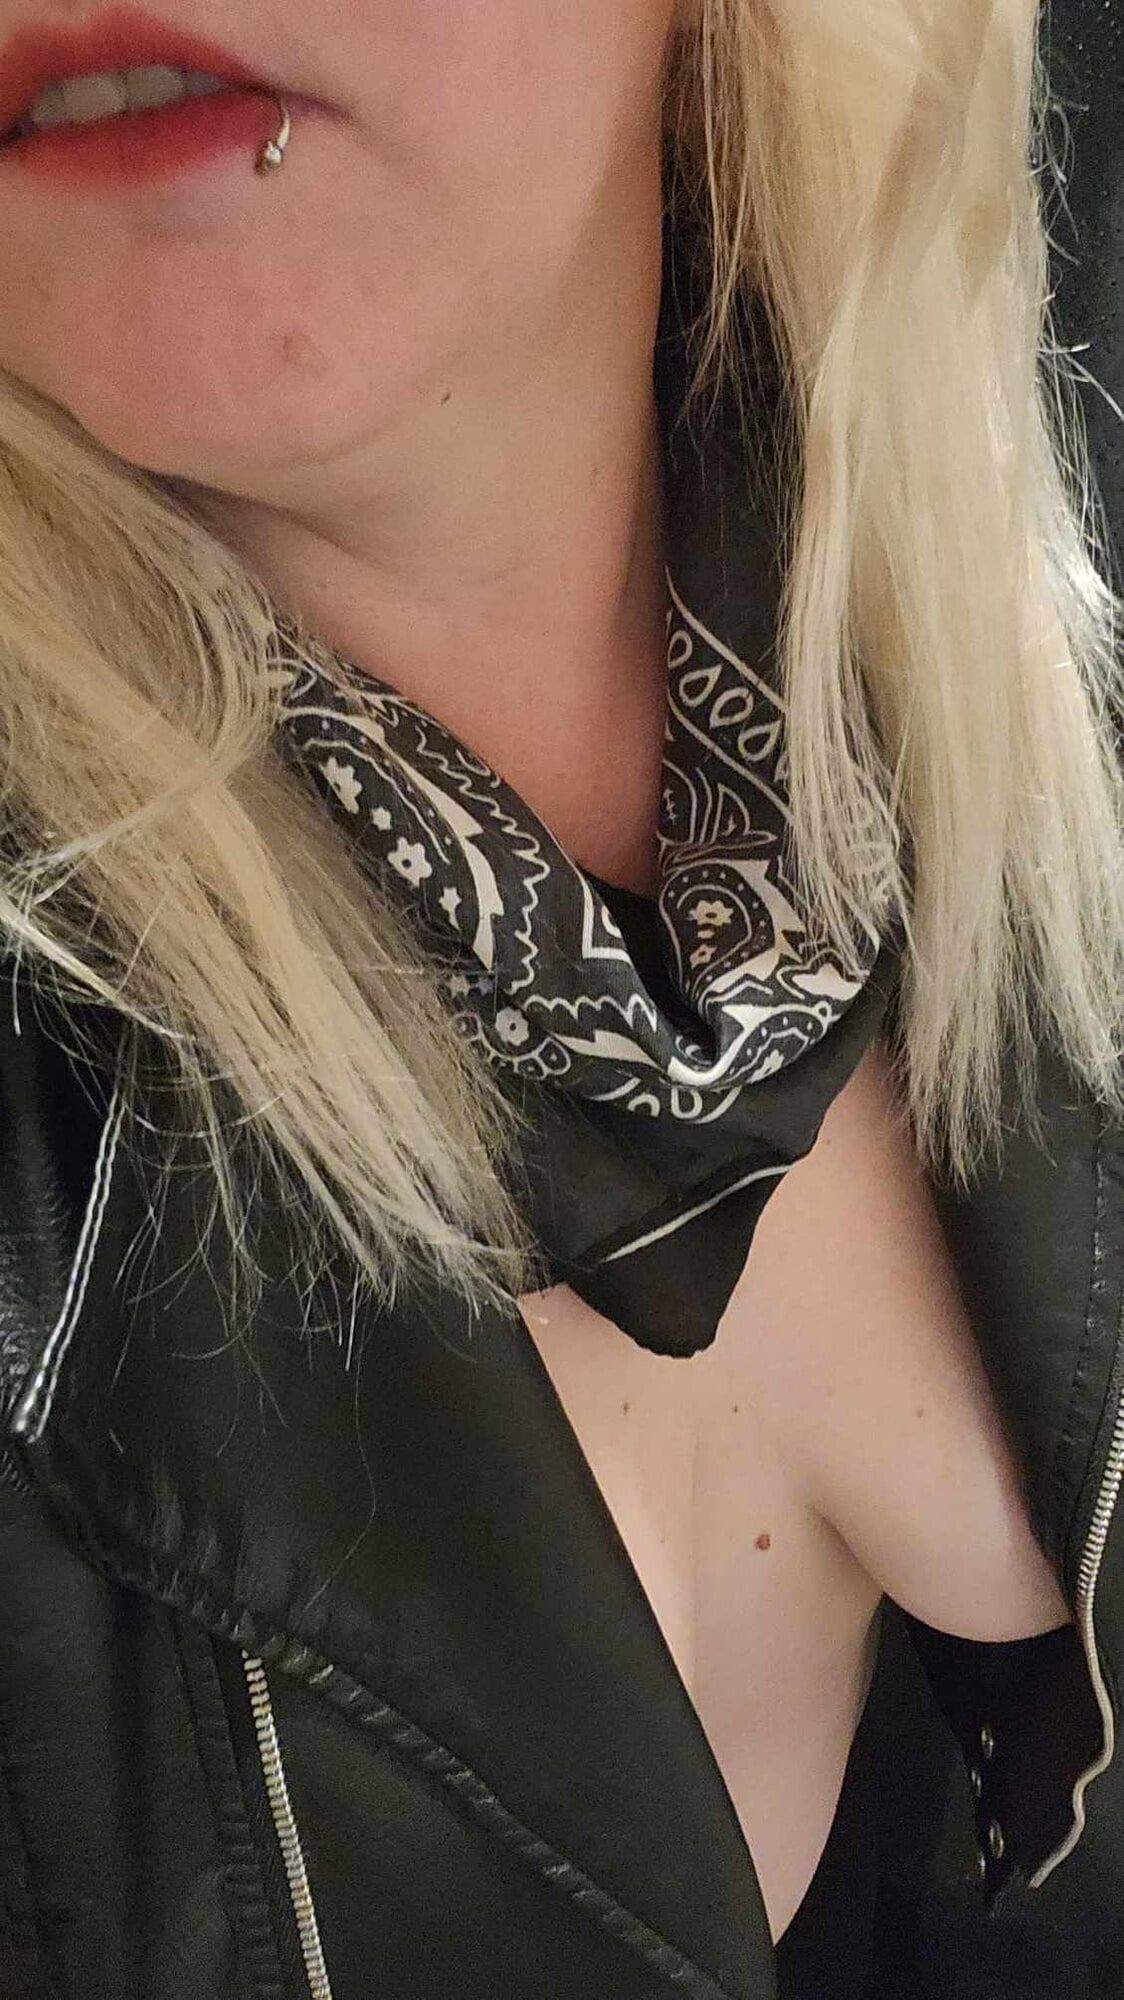 my tits and something else #18